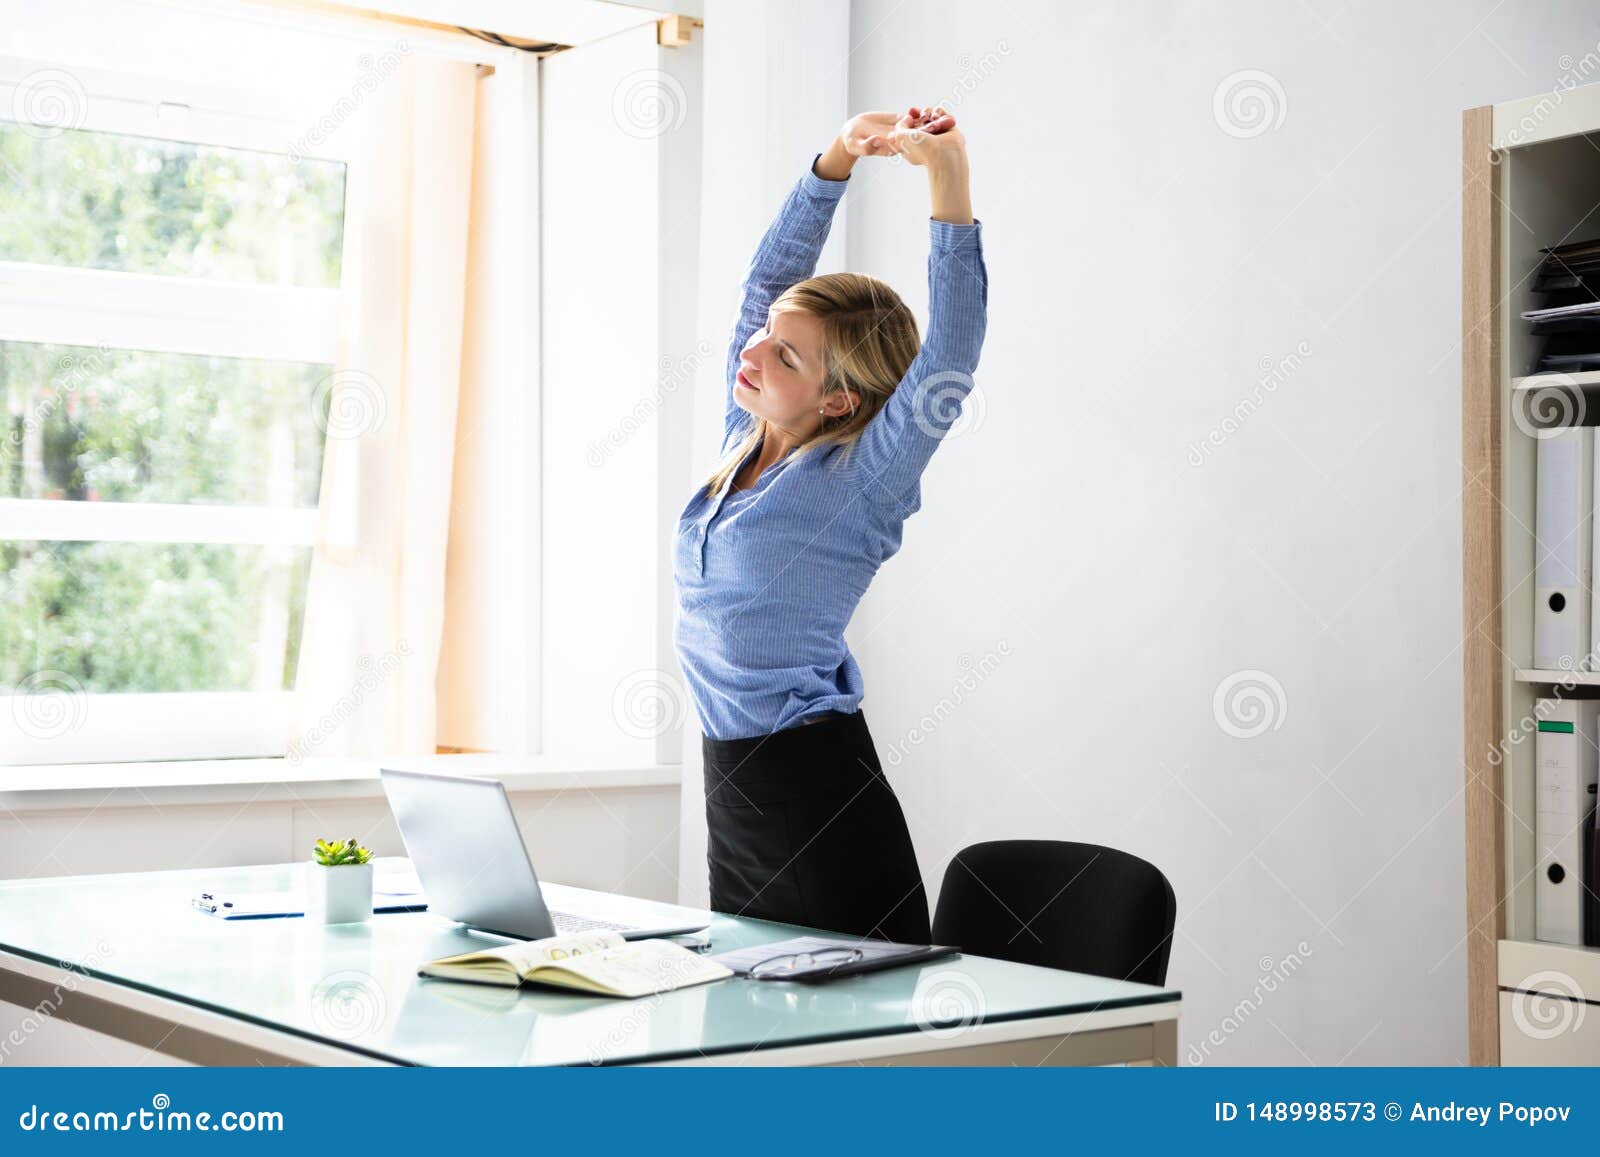 businesswoman stretching her arms at workplace